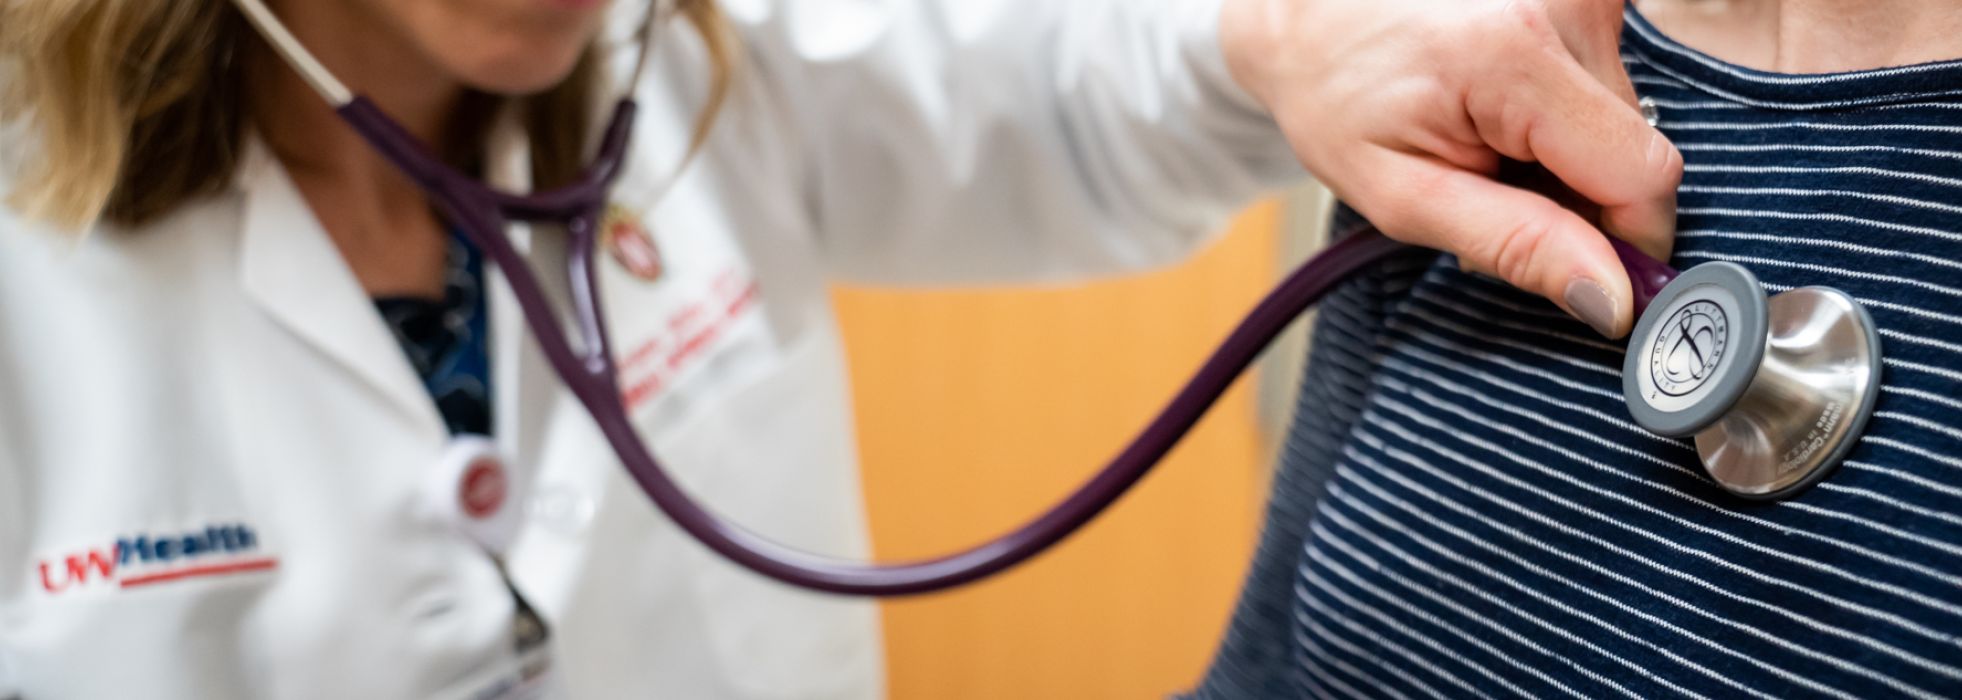 Photo of primary care physician using stethoscope to listen to heartbeat of a patient.